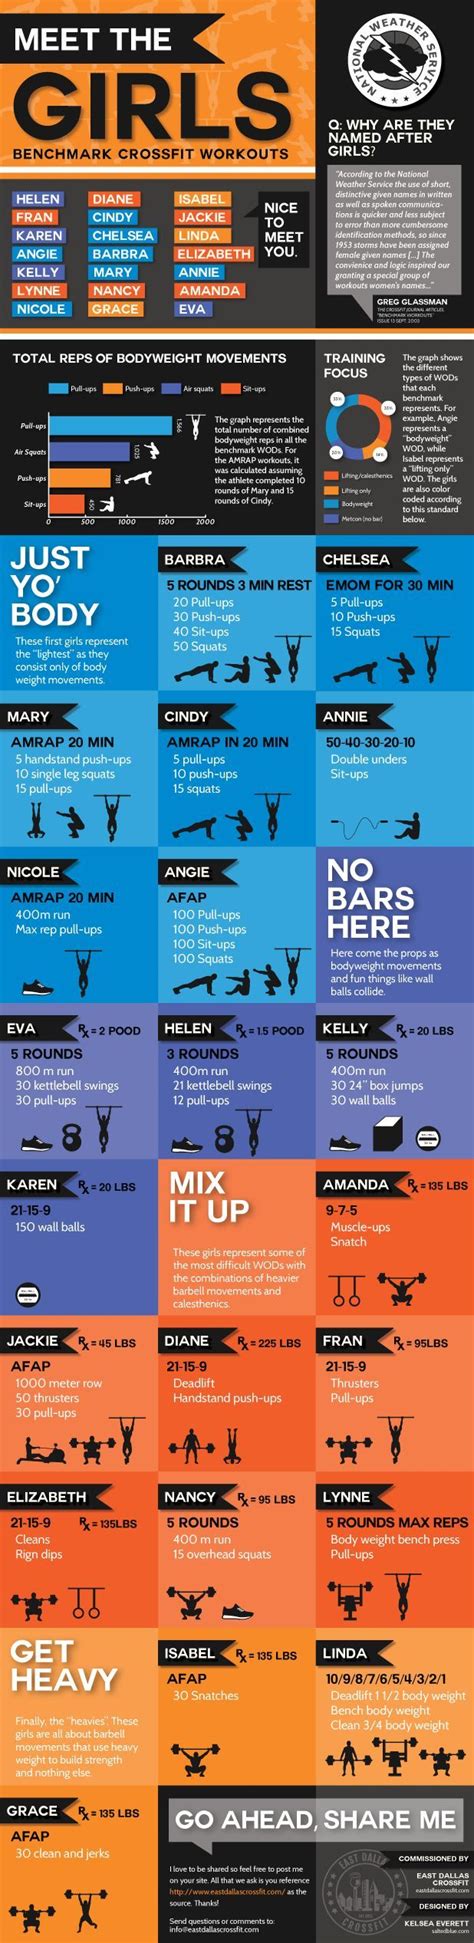 Great Infographic On The Girls Benchmark Workouts Put Together By